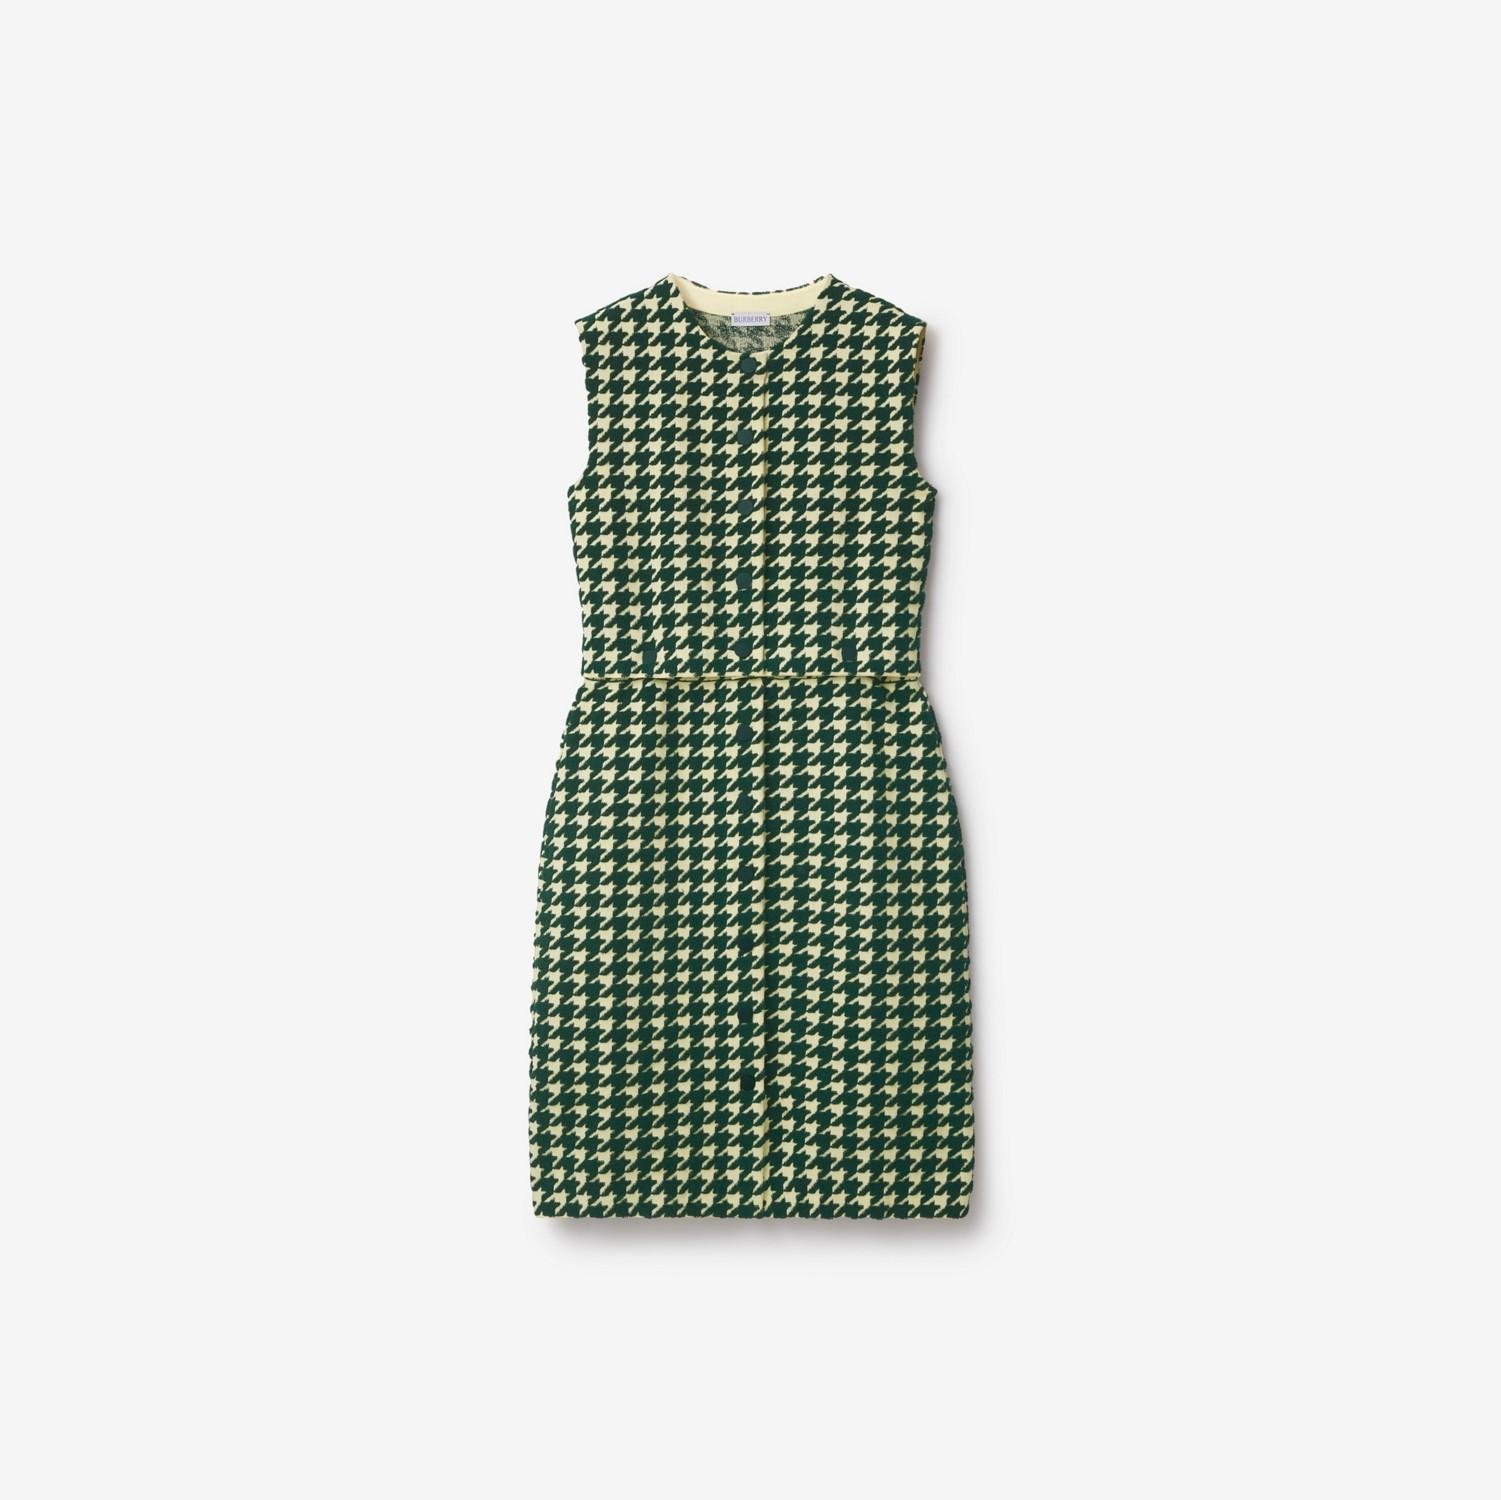 Houndstooth Nylon Blend Dress by BURBERRY